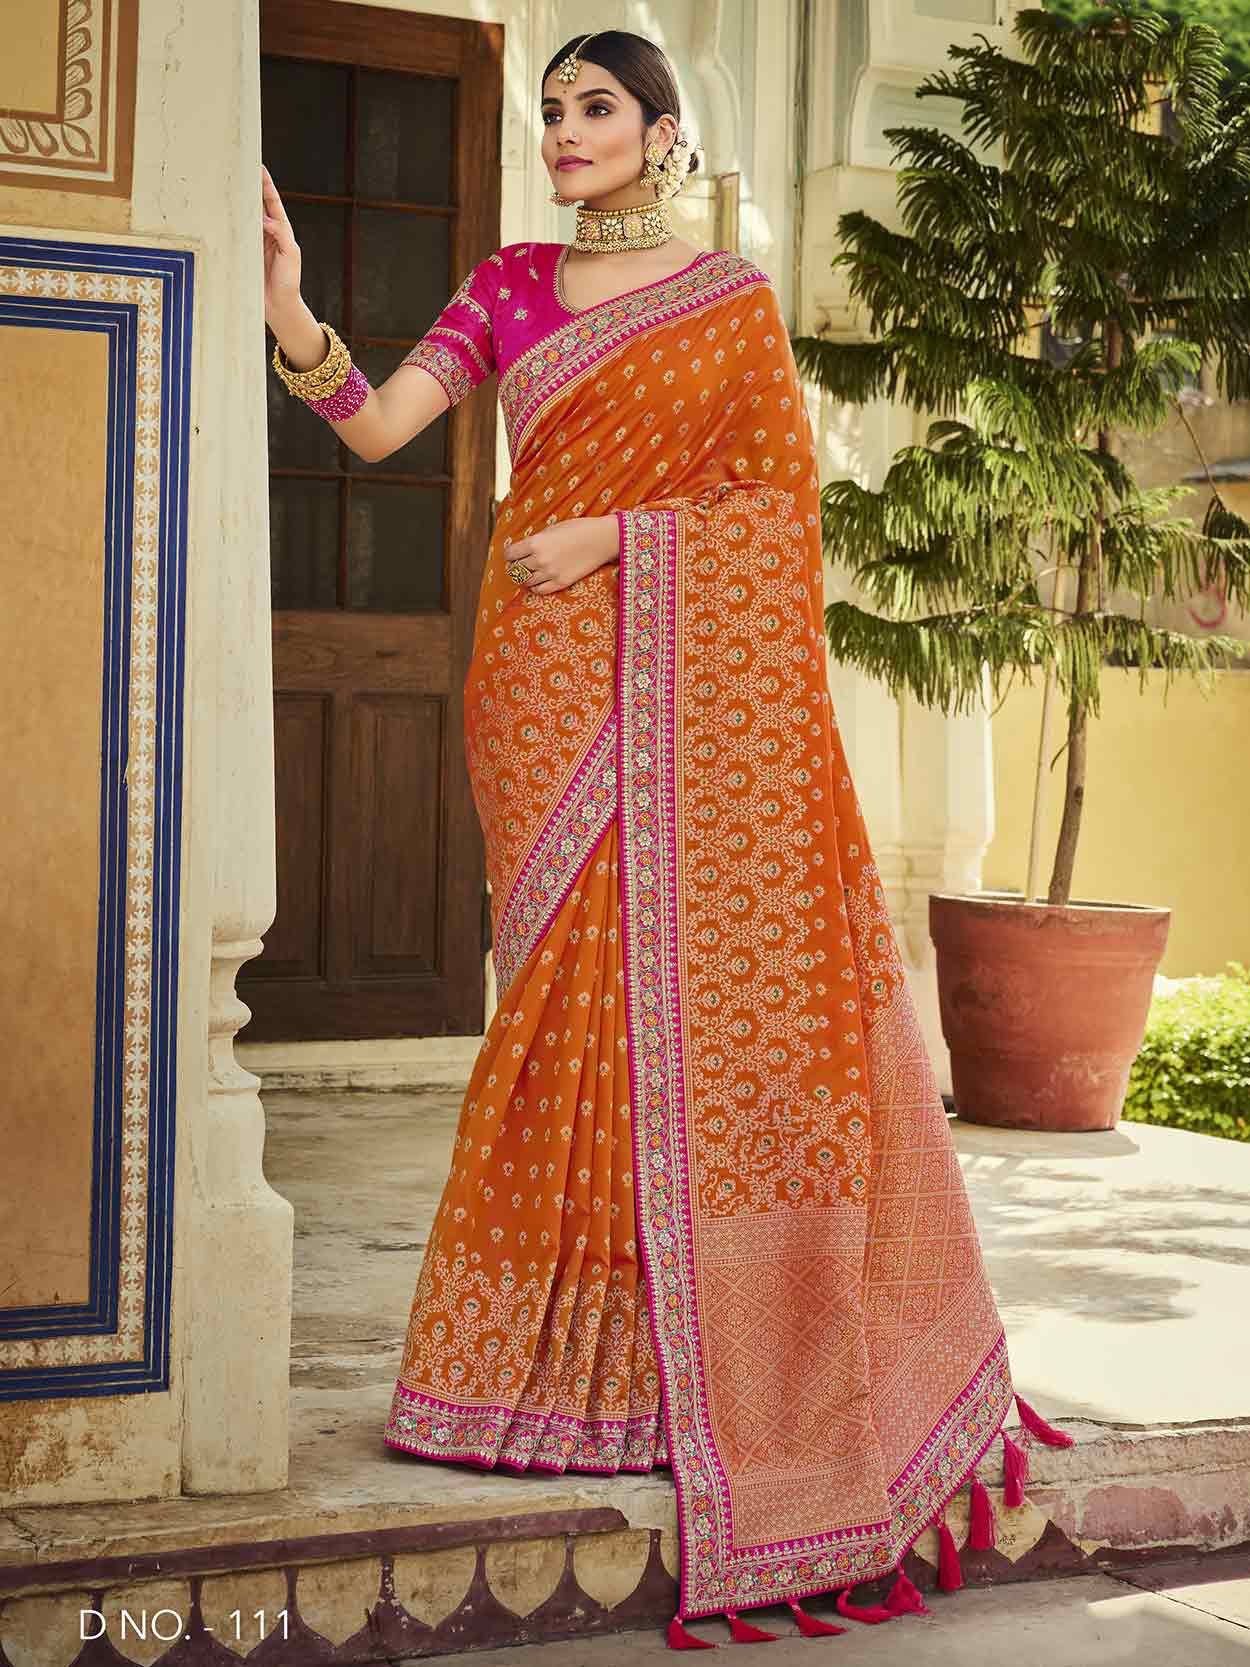 New Collection Velvet Saree Party Wear So Beautiful Colours | gintaa.com